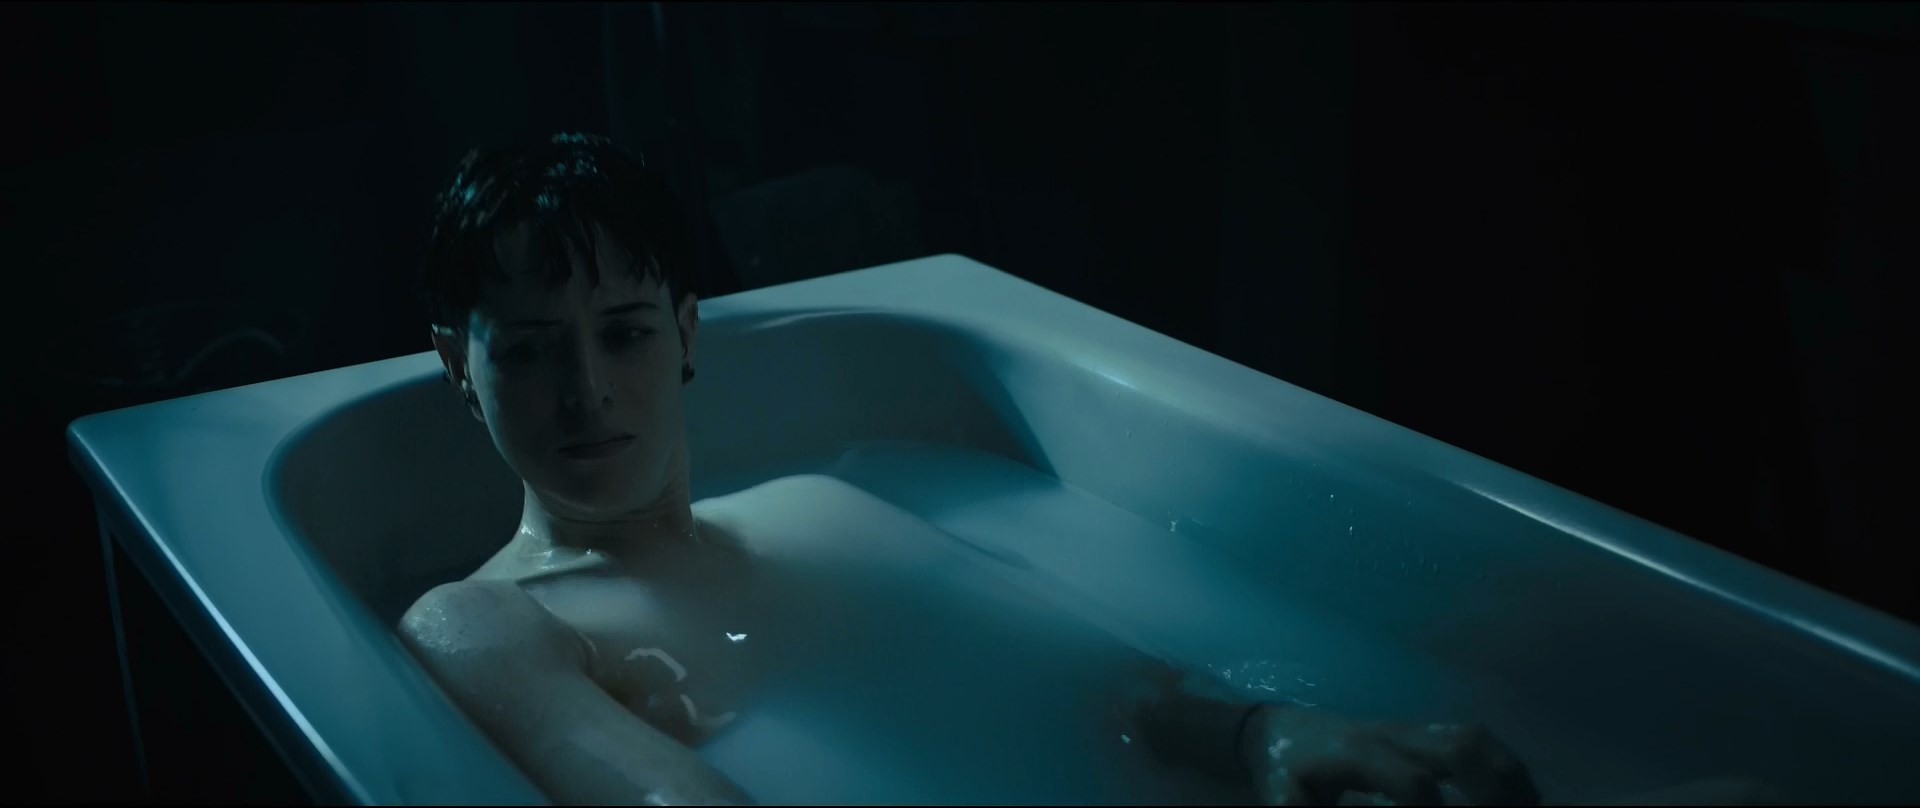 Foy naked claire Claire Foy. 